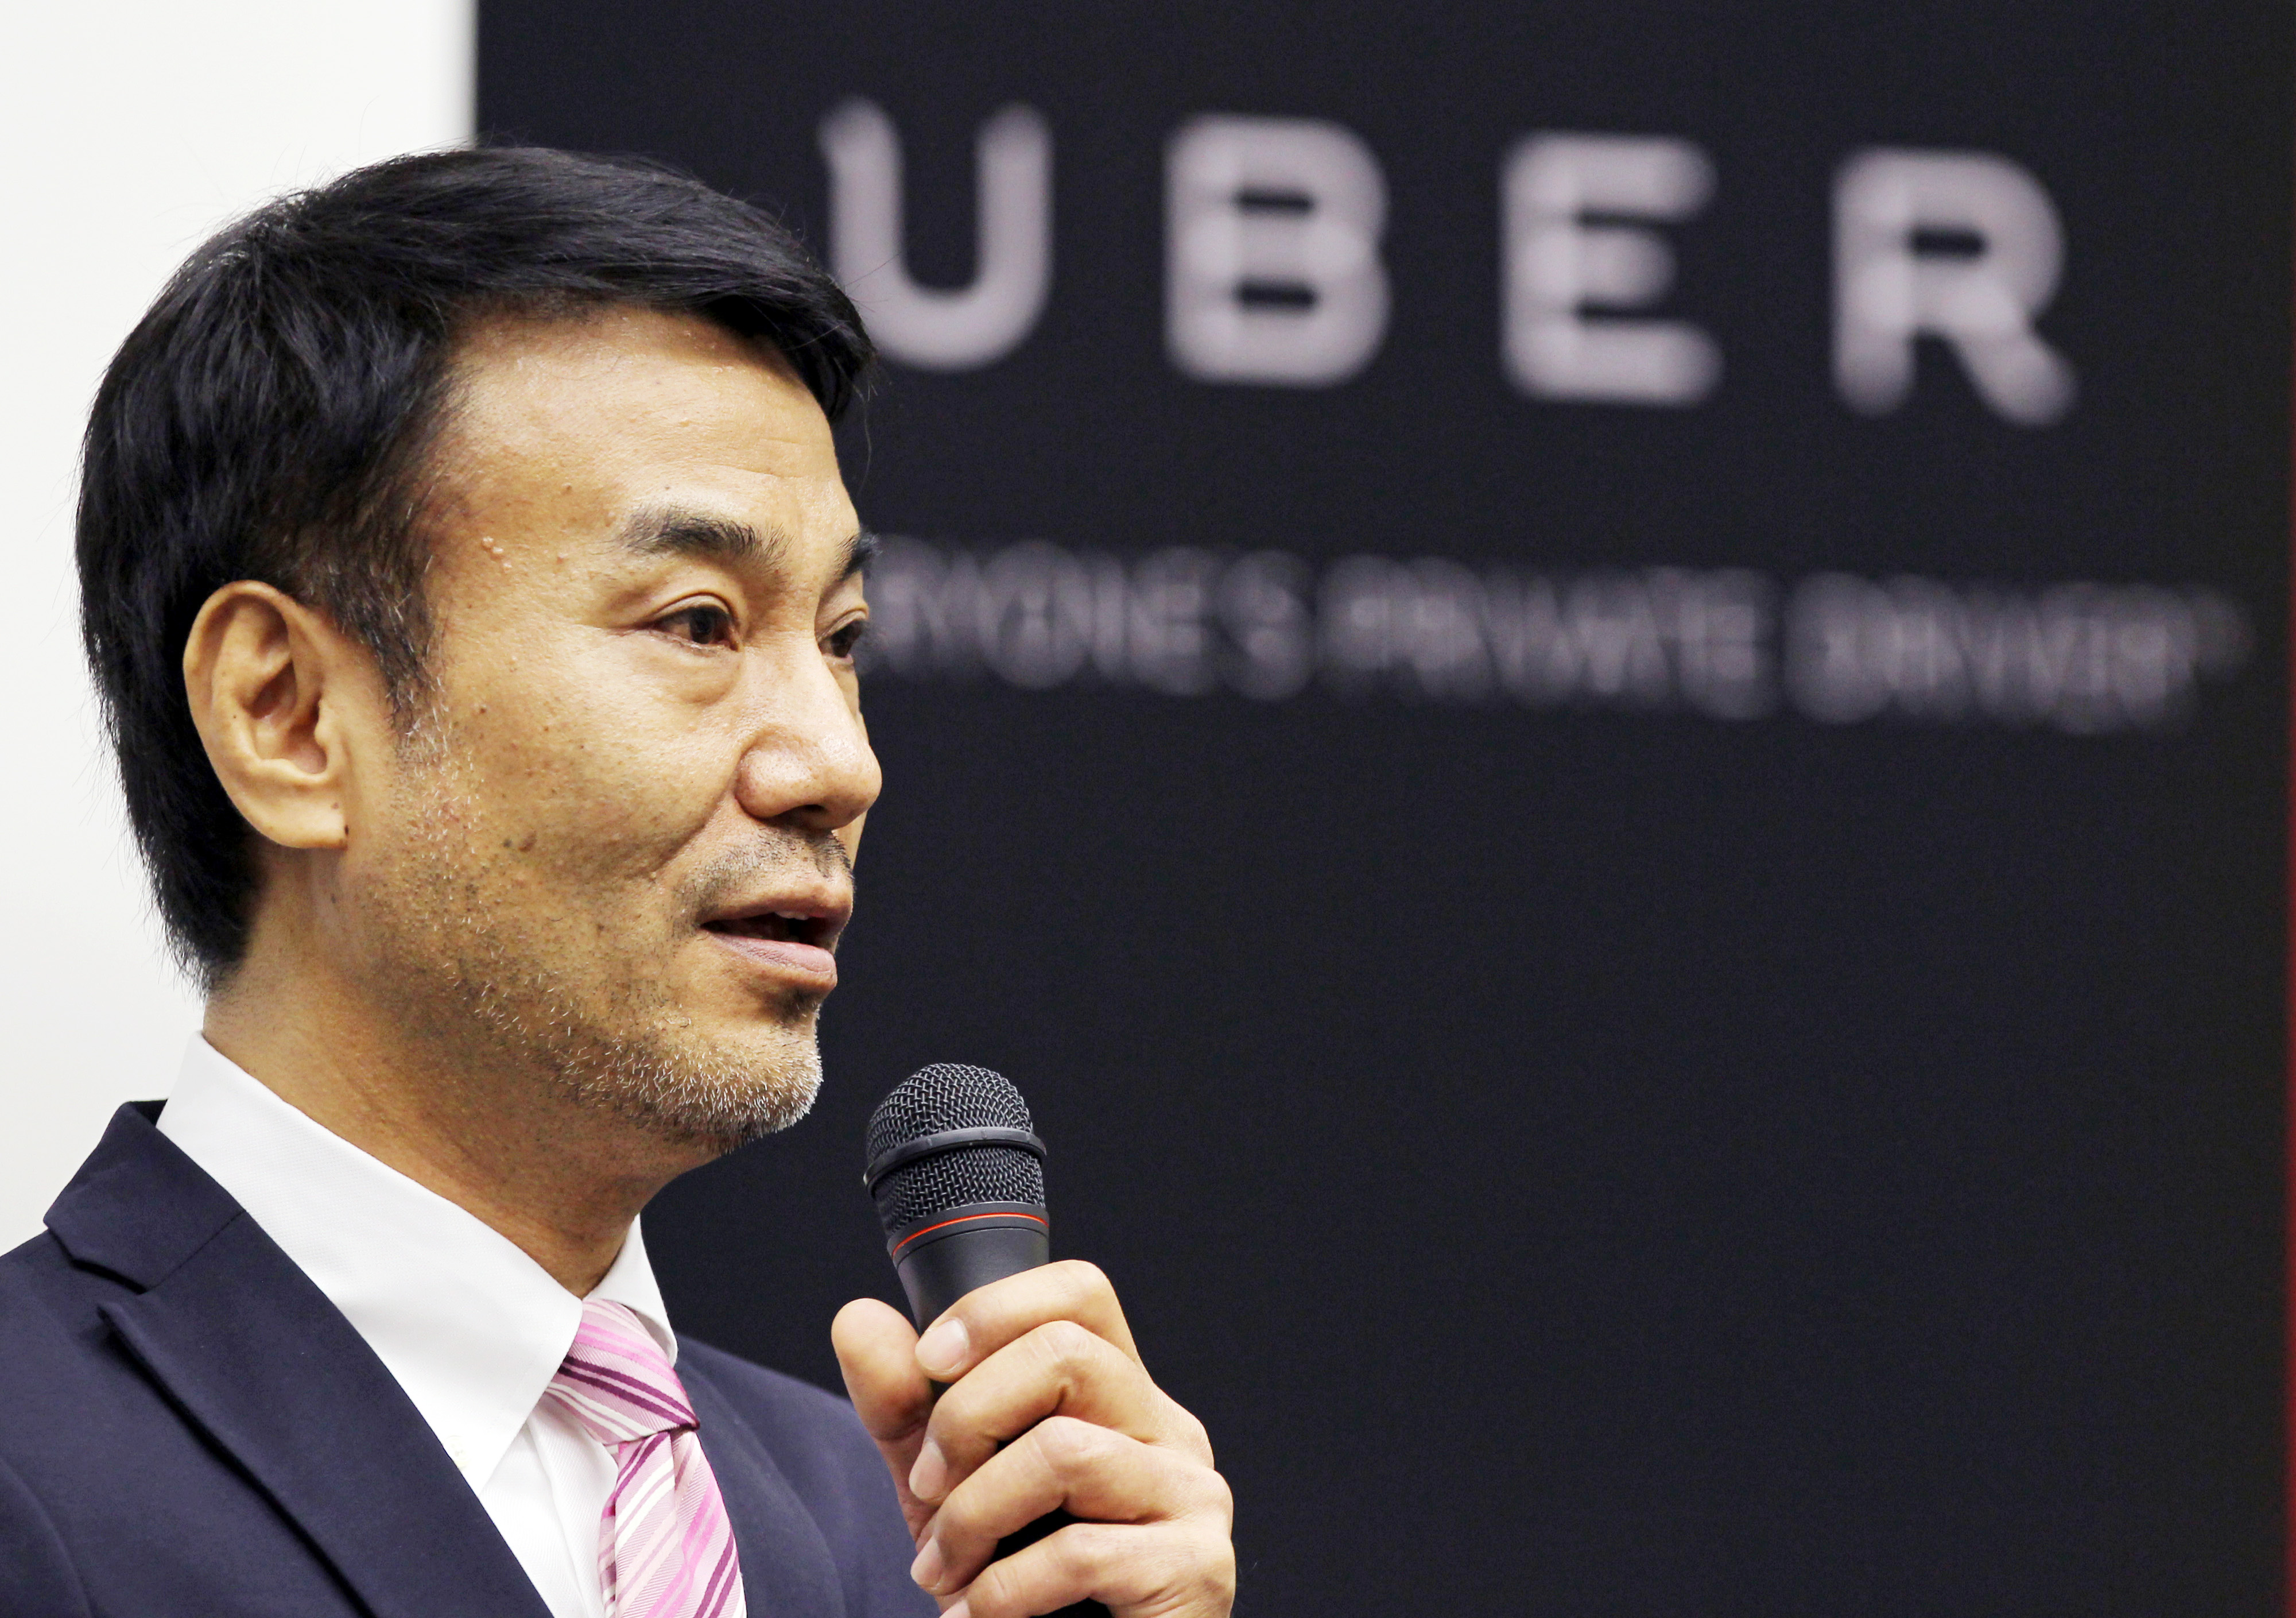 Takeji "Tak" Shiohama, president of Uber Japan Co., speaks at a news conference in Tokyo, on March 3, 2014. (Junko Kimura-Matsumoto—Bloomberg/Getty Images)